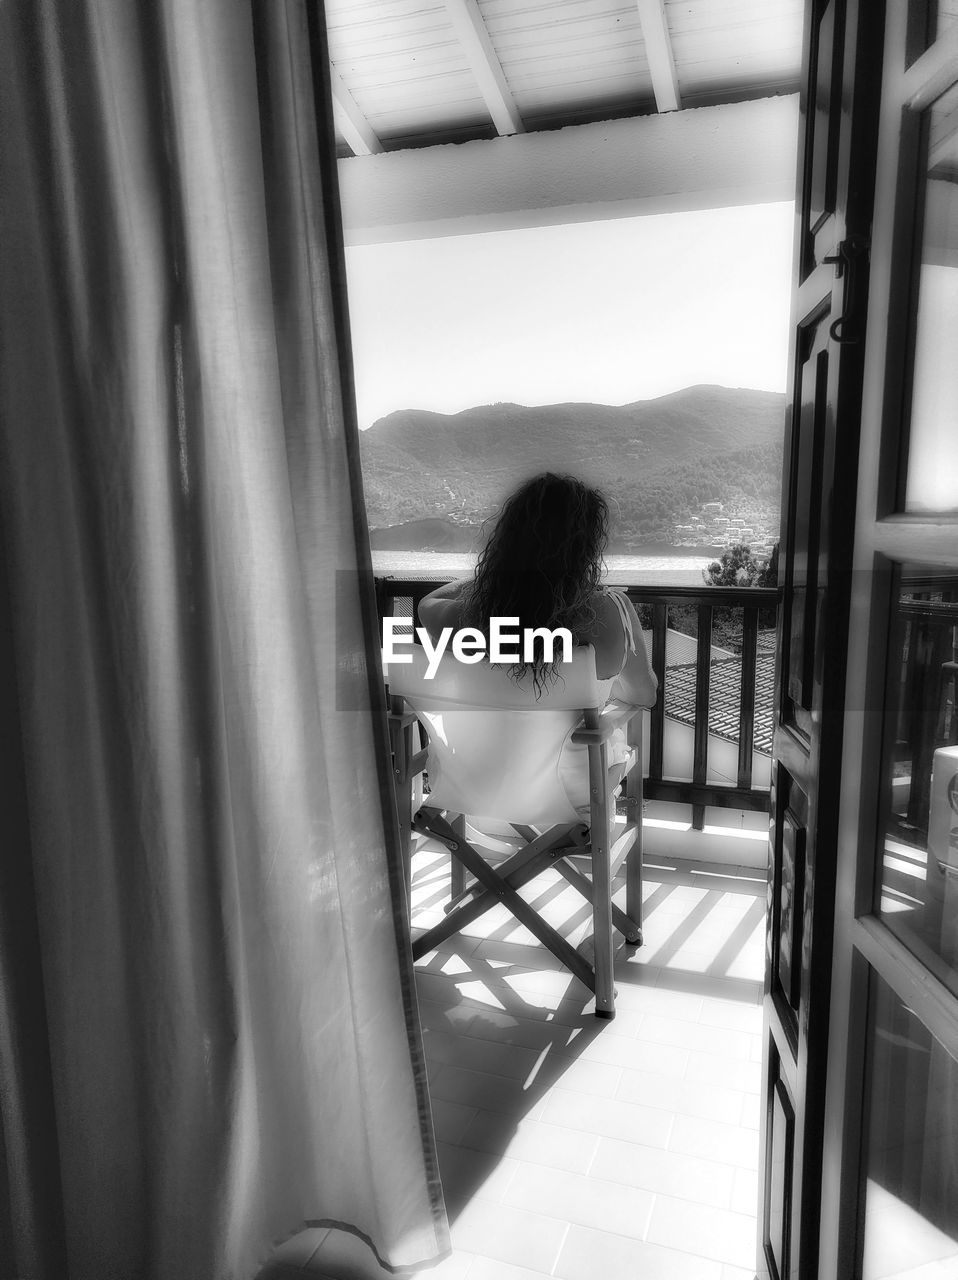 black, black and white, one person, women, white, adult, monochrome photography, indoors, window, lifestyles, rear view, monochrome, sitting, leisure activity, day, full length, young adult, nature, home interior, architecture, female, looking, interior design, relaxation, casual clothing, person, glass, looking through window, hairstyle